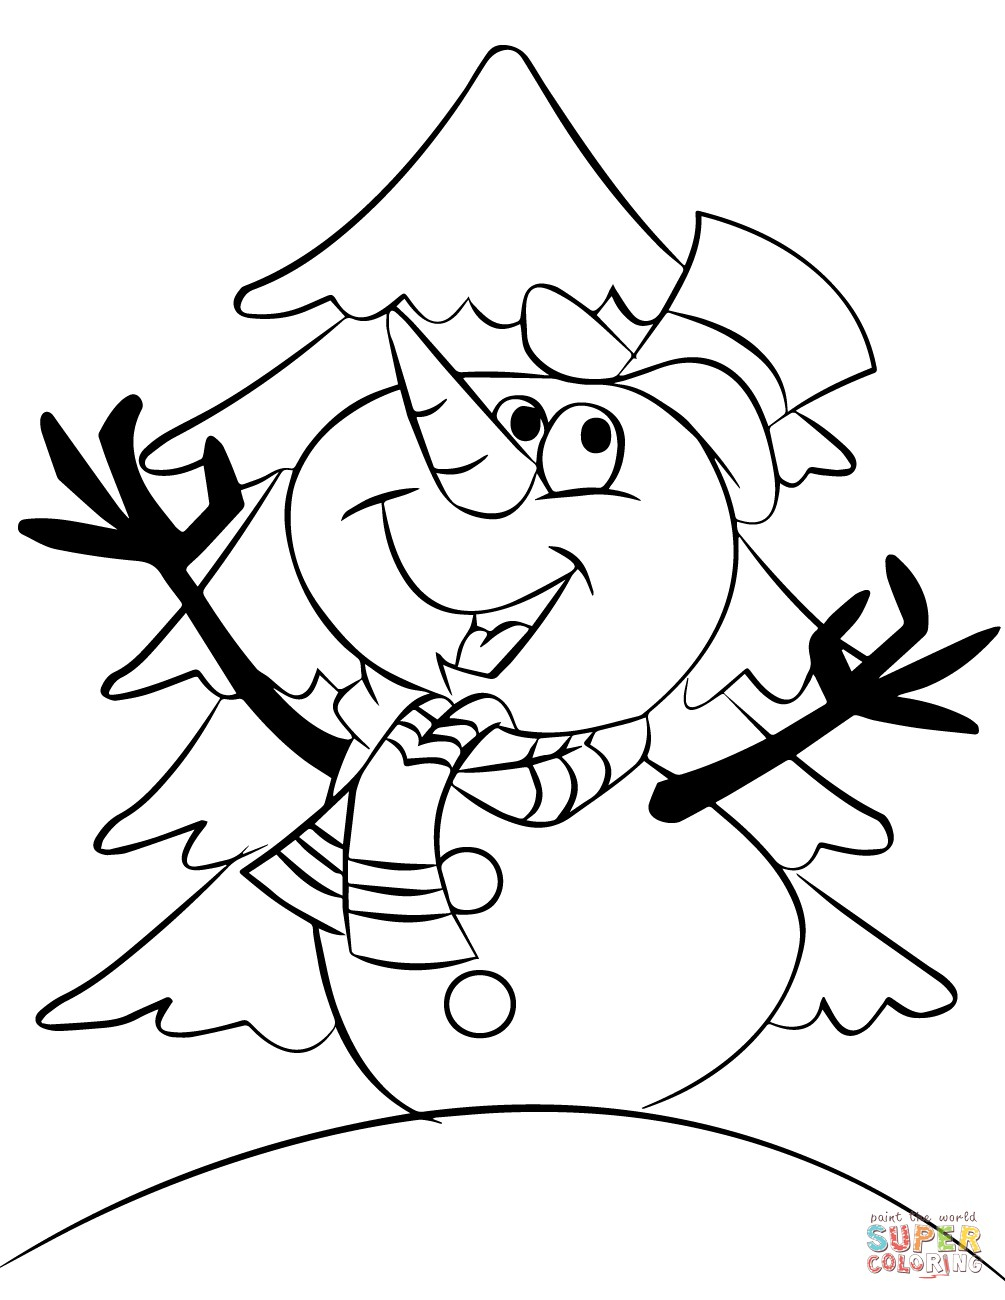 Coloring Pages Of Snowmen Snowman Cartoon Black White Coloring Page Snow Pages 2 Telematik